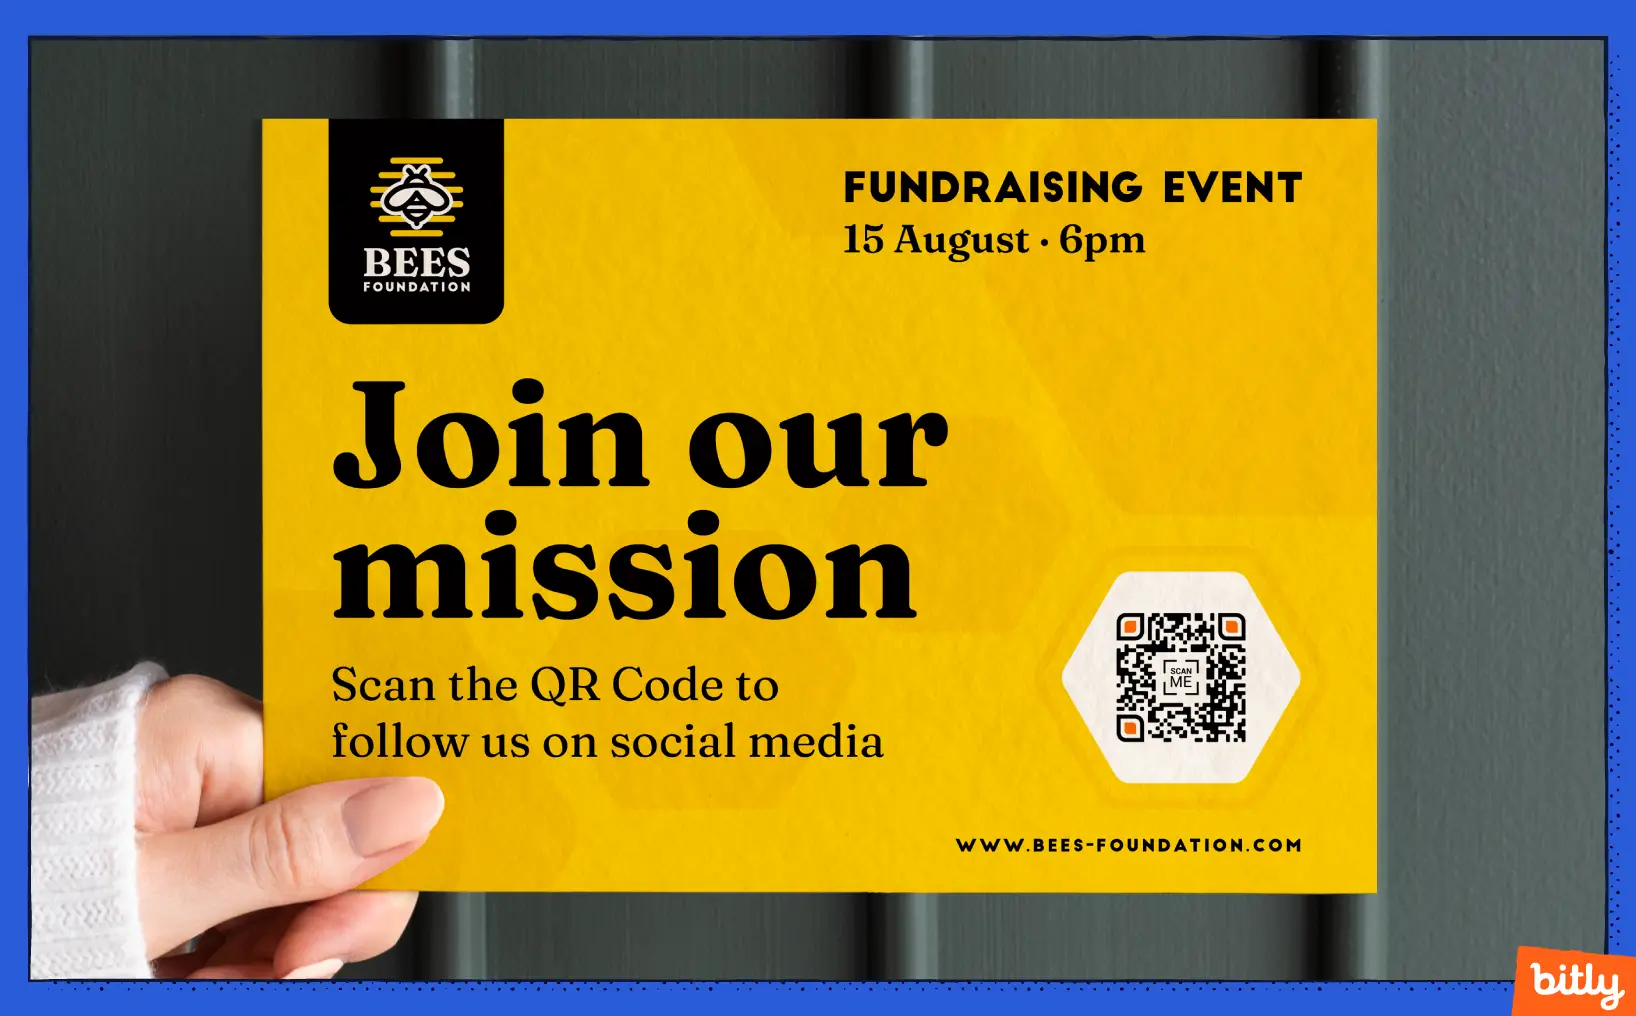 Bees Foundation fundraising event flyer with a Social Media QR Code and call-to-action to scan to follow their socials